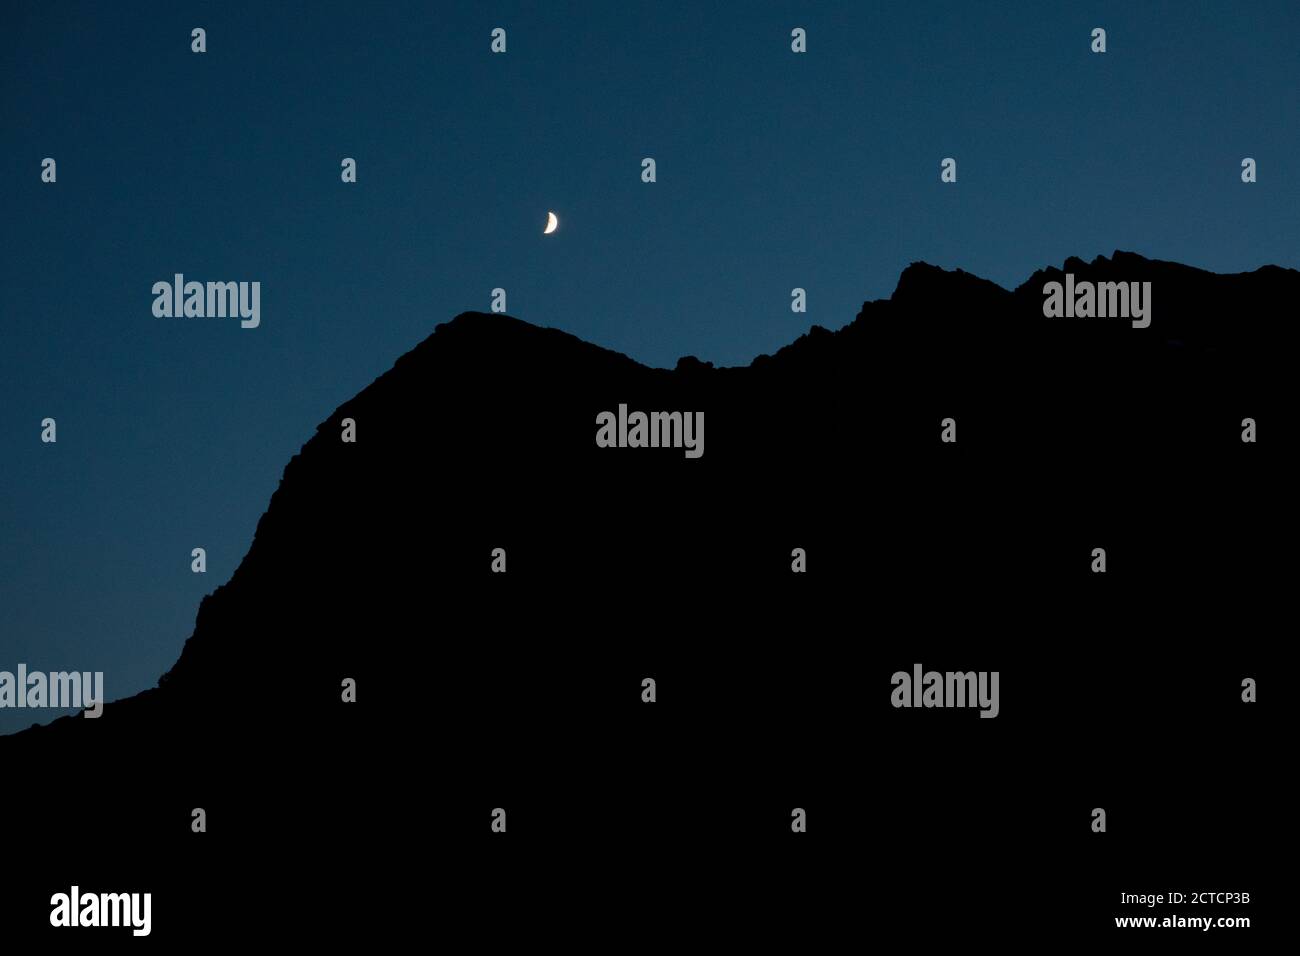 Crescent moon with silhouette of mountain ridge against clear sky at night Stock Photo